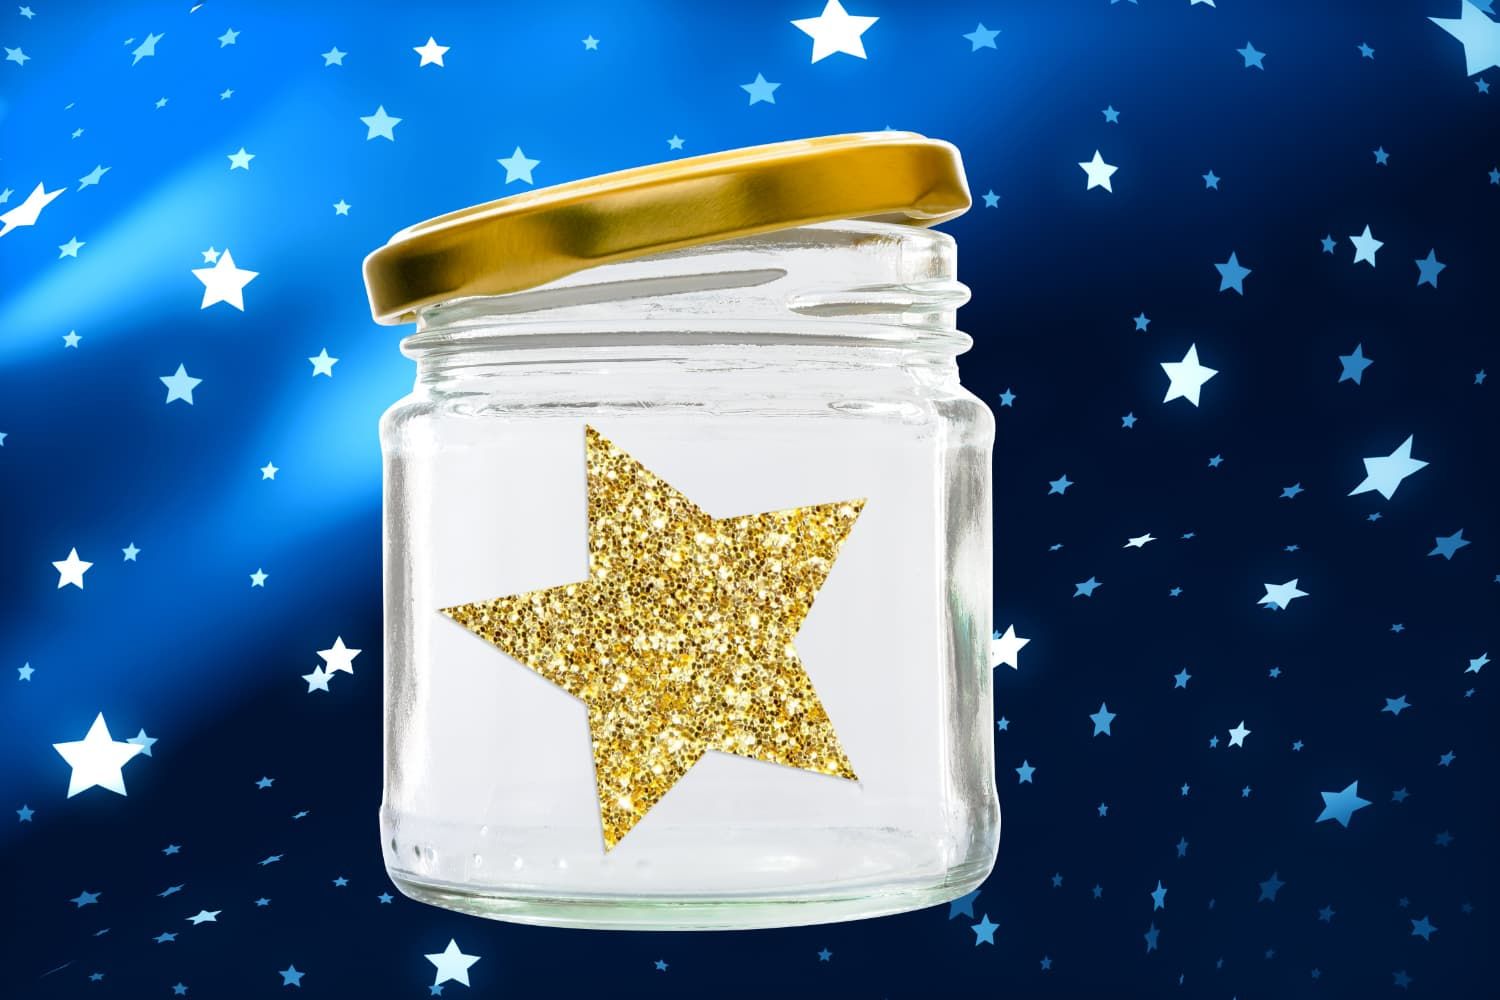 Object%20lesson%20-%20Stars%20in%20a%20jar-6132cbc5 Promises